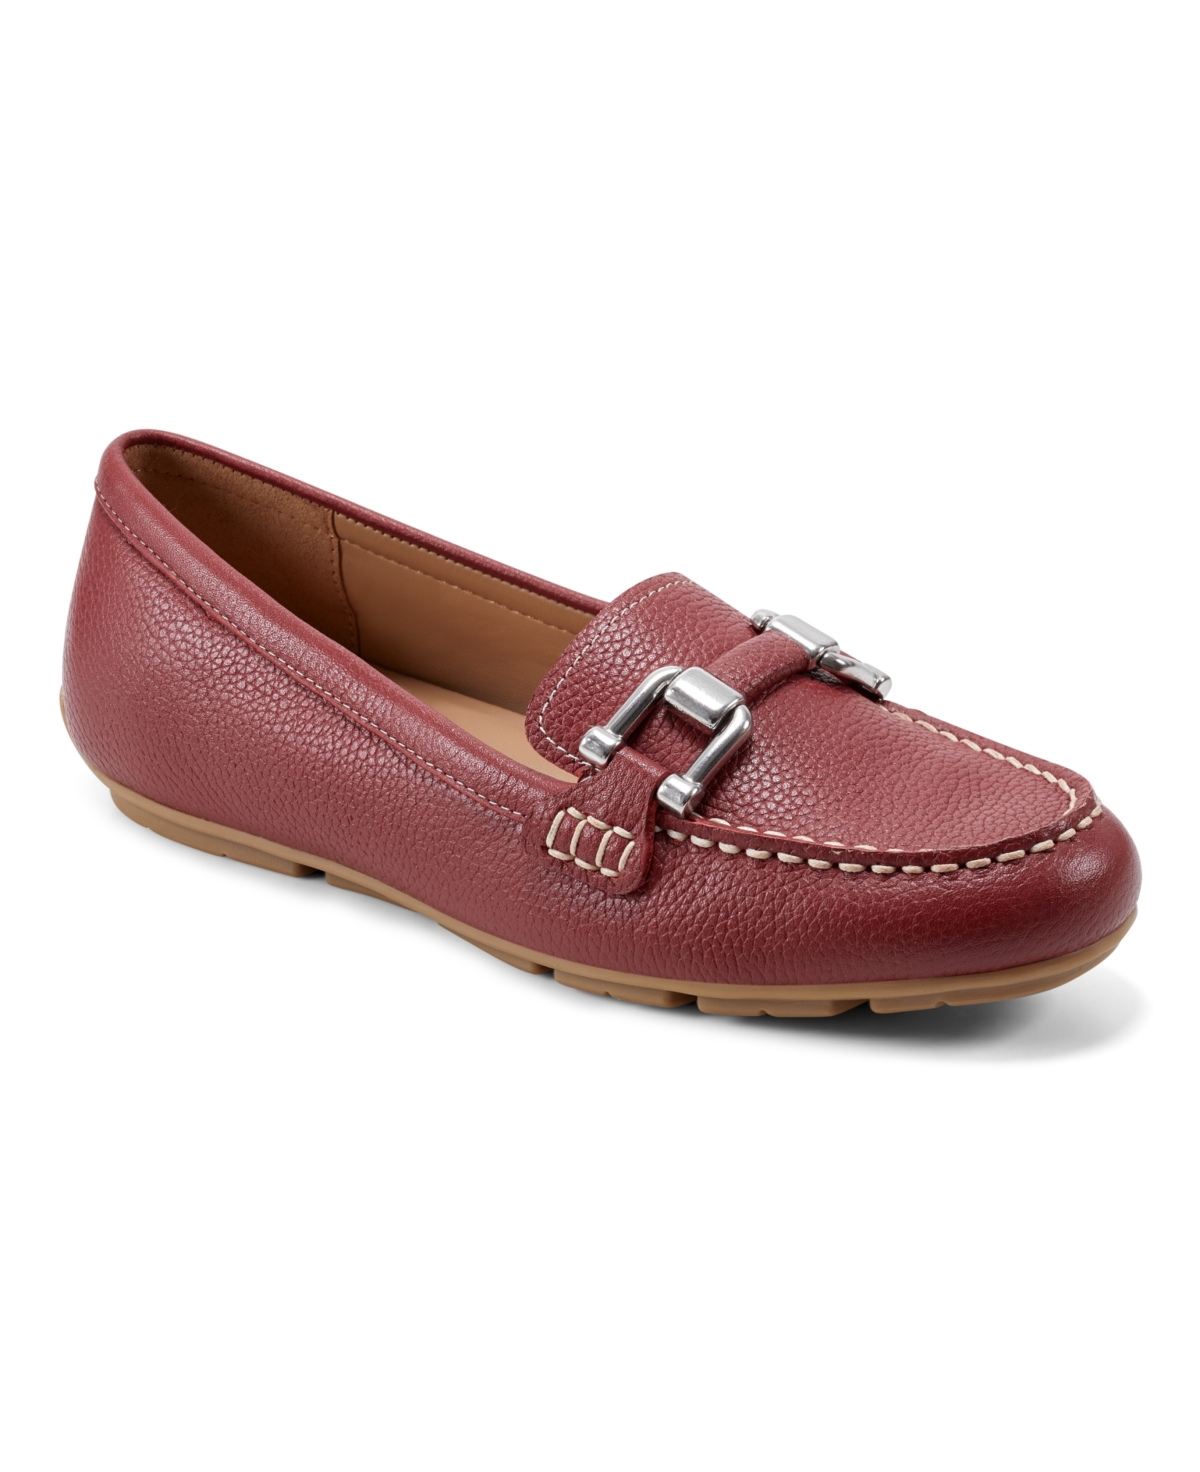 Women's Megan Slip-On Round Toe Casual Loafers - Red Leather